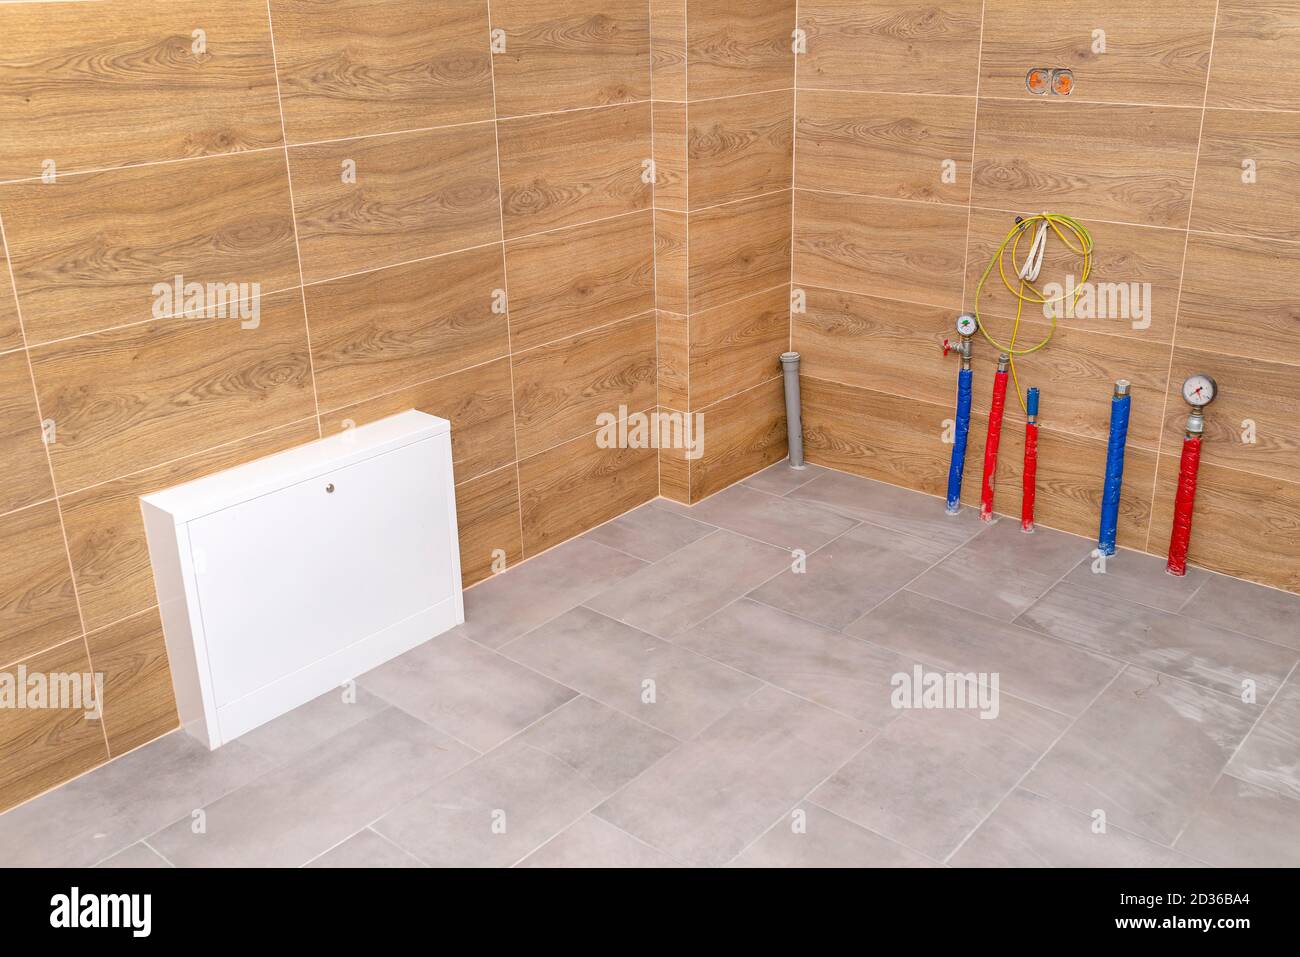 Water pipes, underfloor heating pipes and sewage system coming out of the floor in a modern boiler room made of brown ceramic tiles. Stock Photo